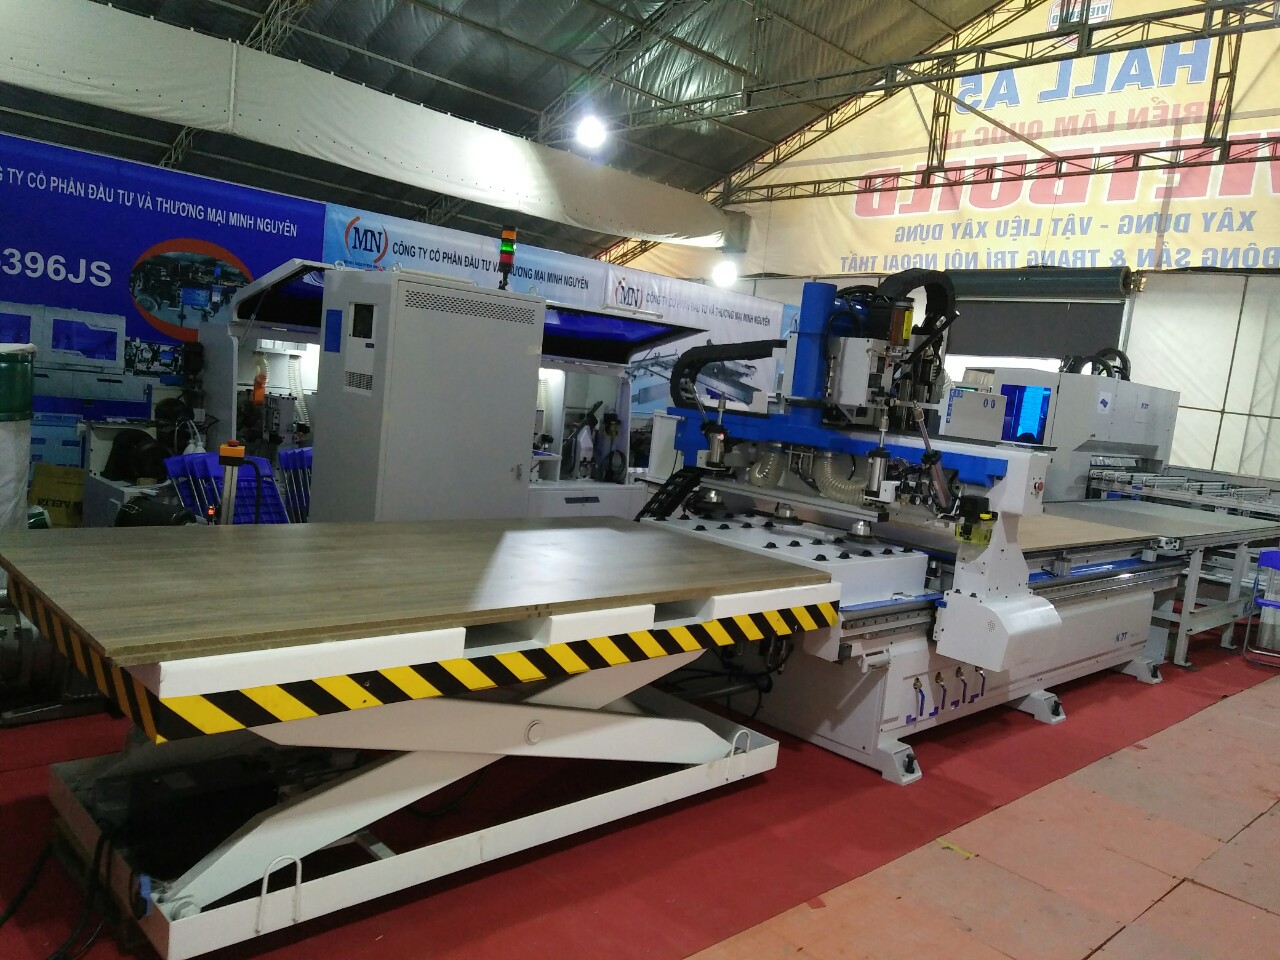 KN2408DT-may-gia-cong-trung-tam-cnc-gia-cong-go-cong-nghiep-13